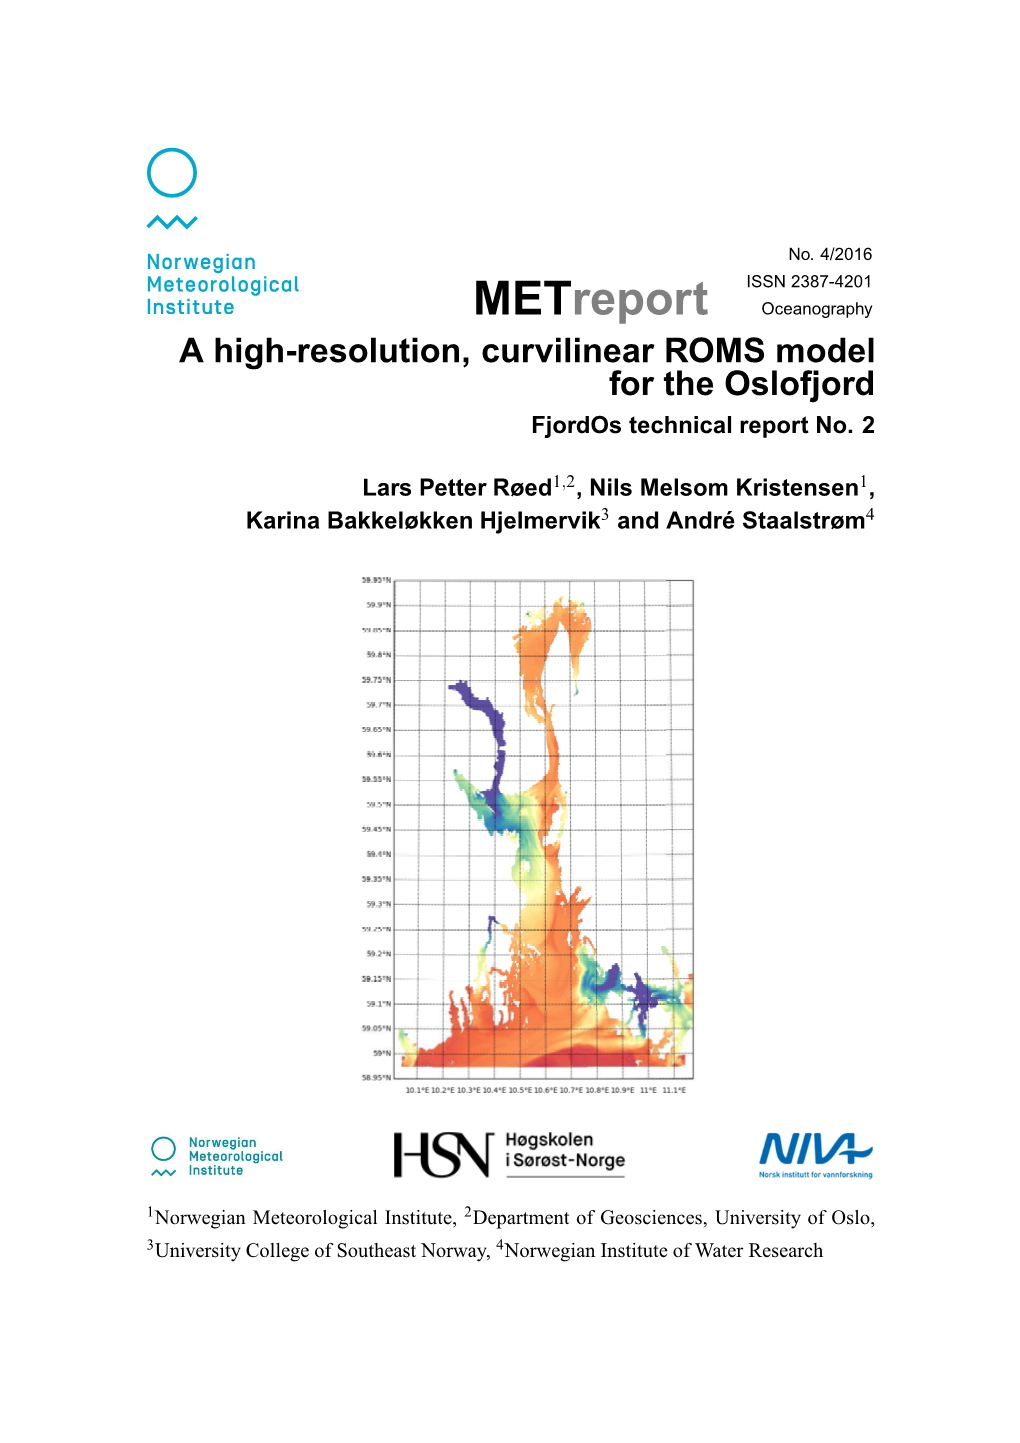 Metreport Oceanography a High-Resolution, Curvilinear ROMS Model for the Oslofjord Fjordos Technical Report No